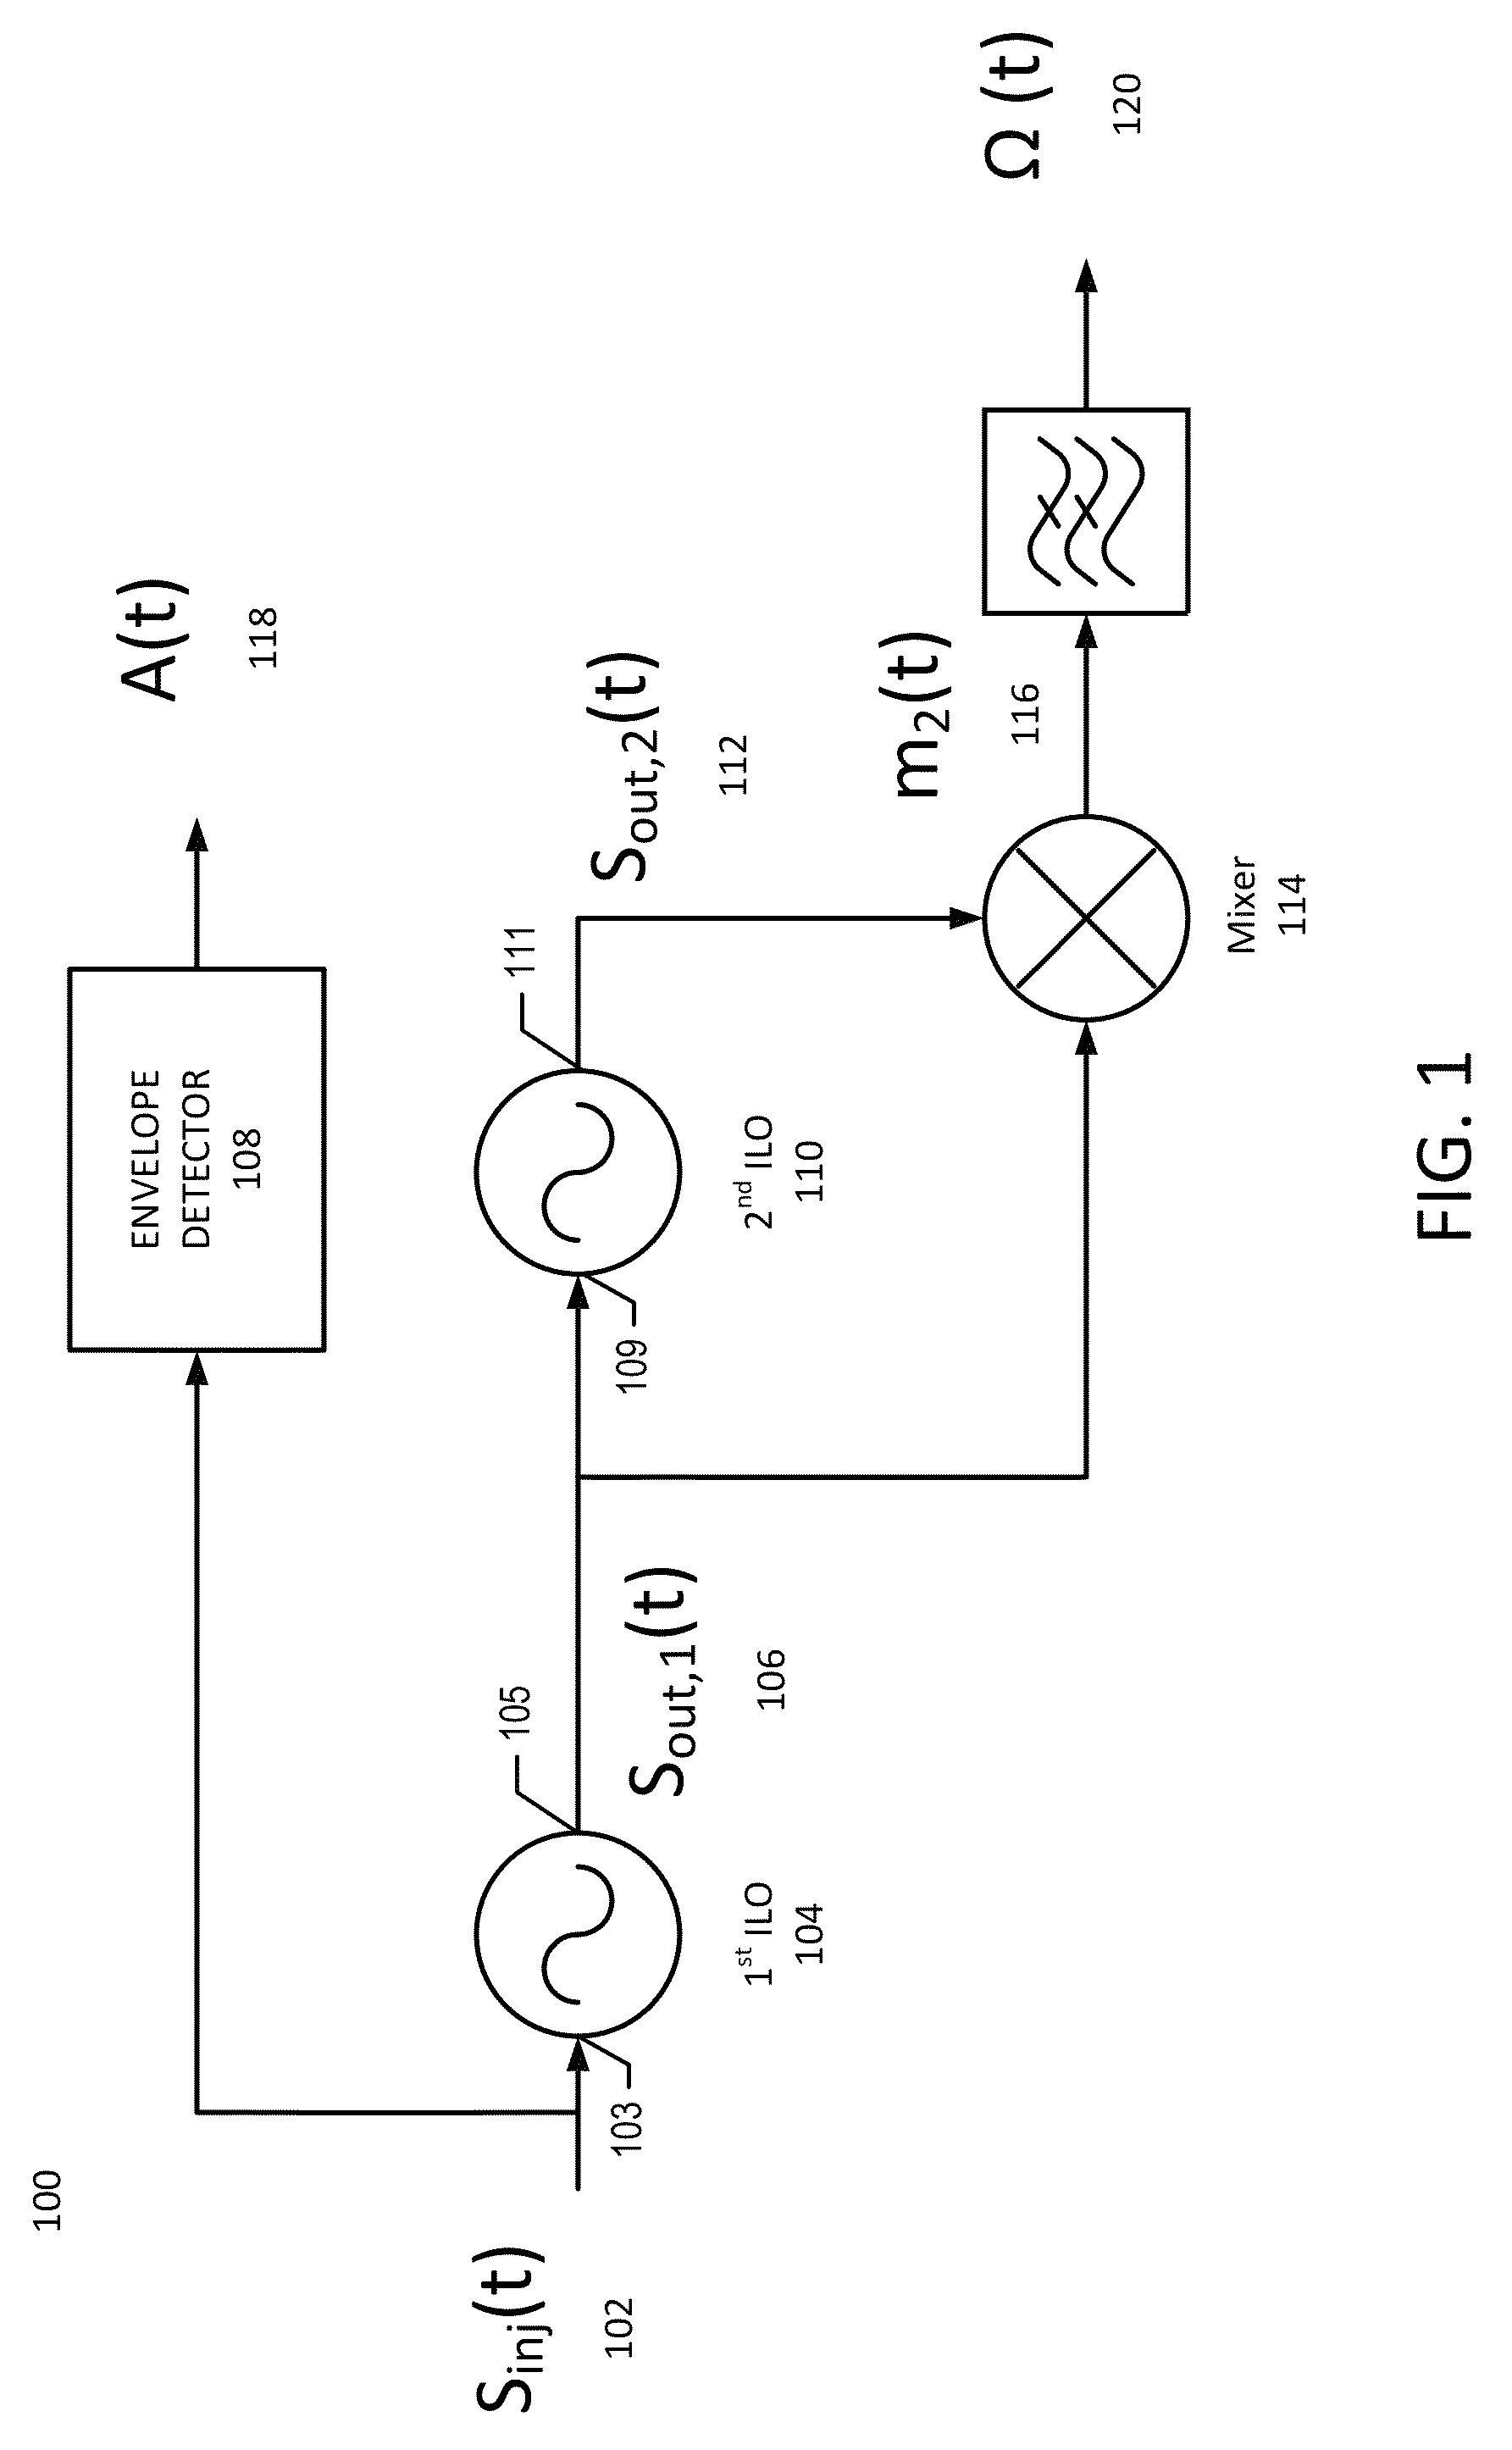 Polar receiver architecture and signal processing methods